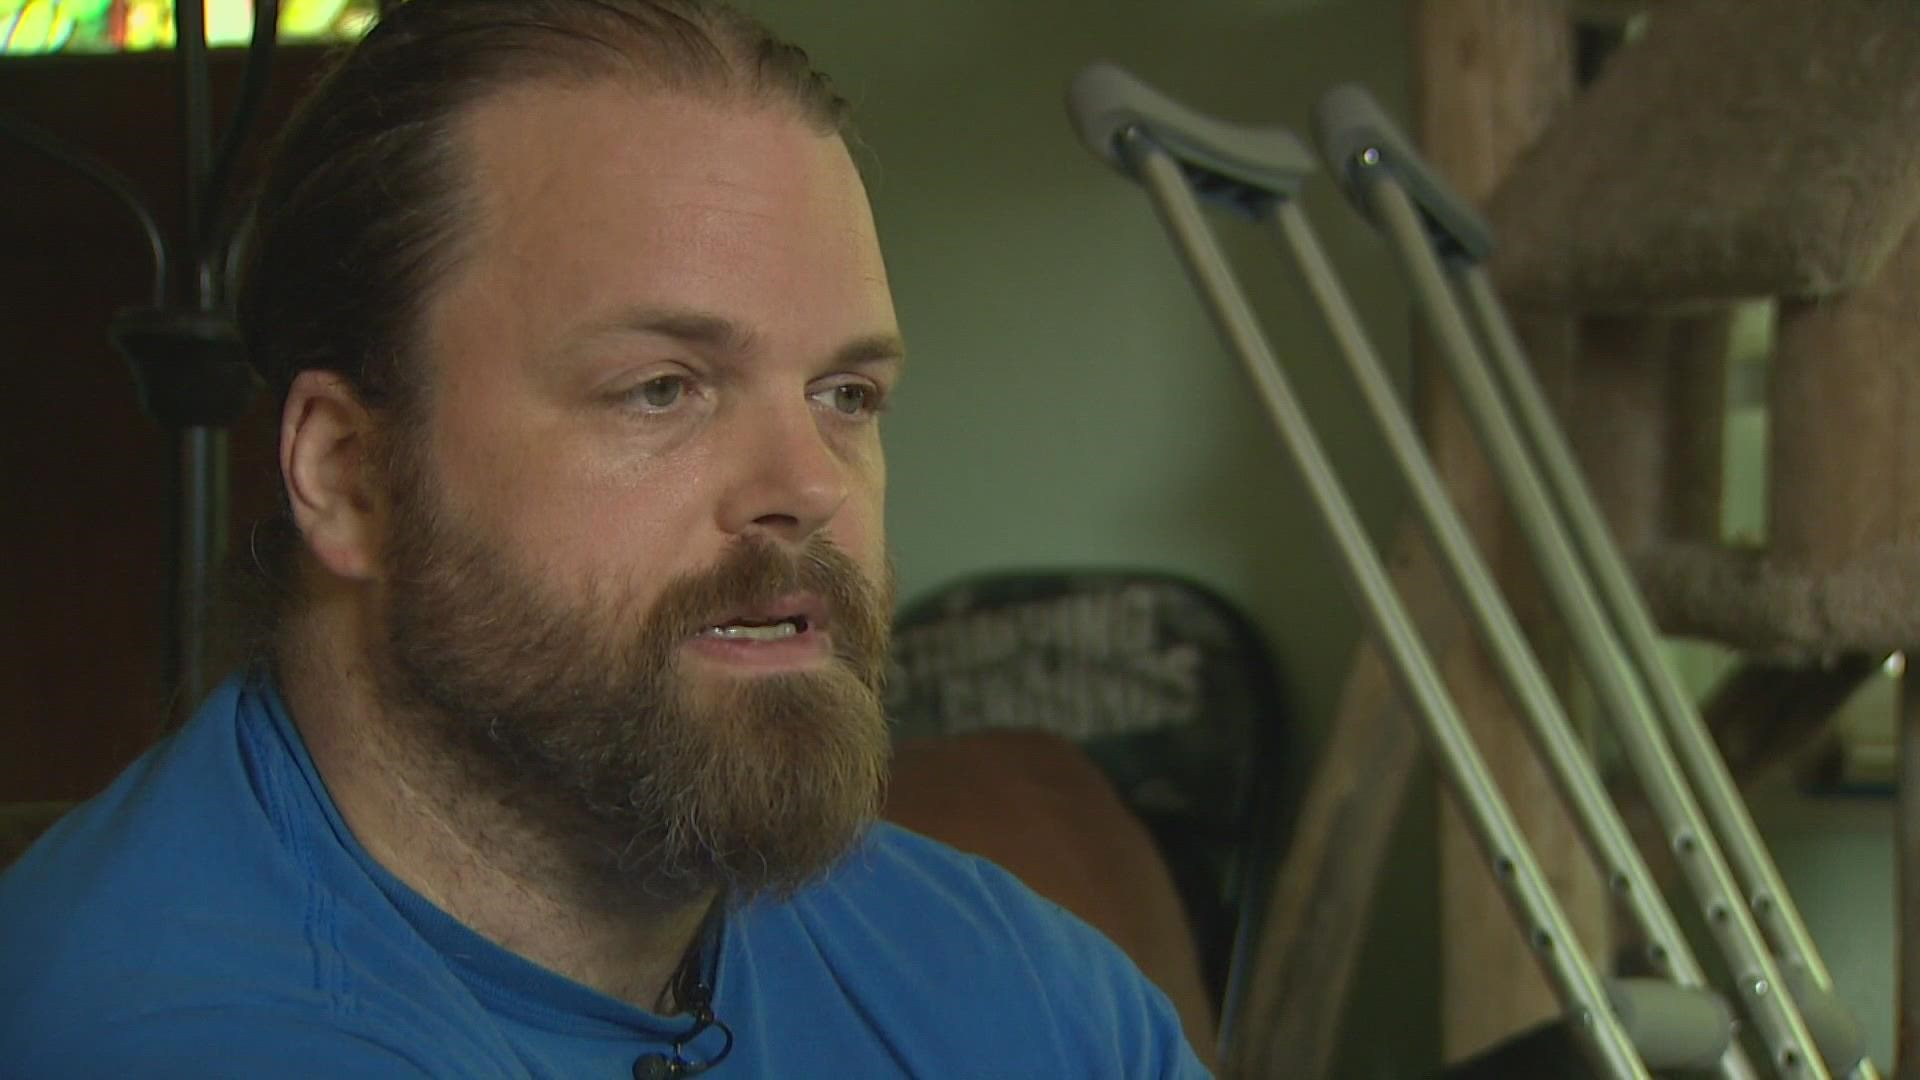 Darin Wall says he stopped 26-year-old gunman Ethan Byrd on Sunday morning outside The Shredder music venue in Boise.